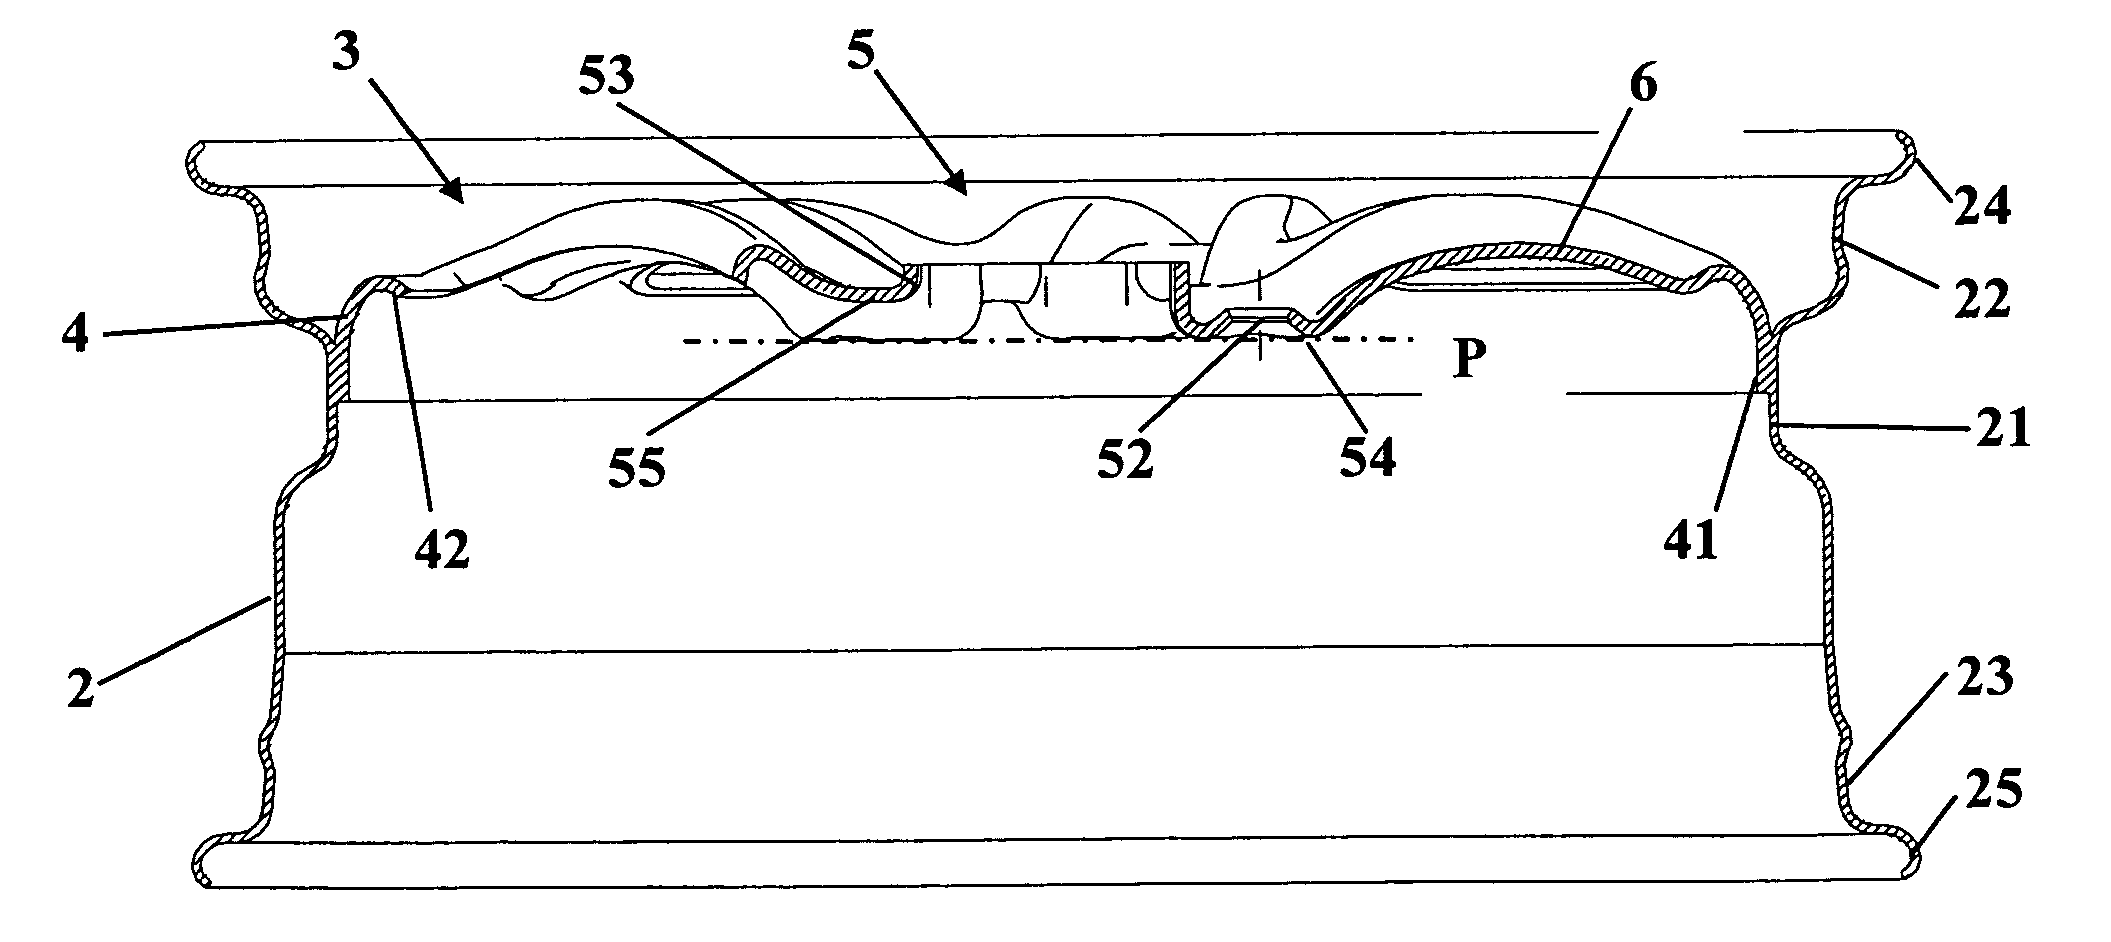 Motor vehicle wheel disc, in particular for passenger car